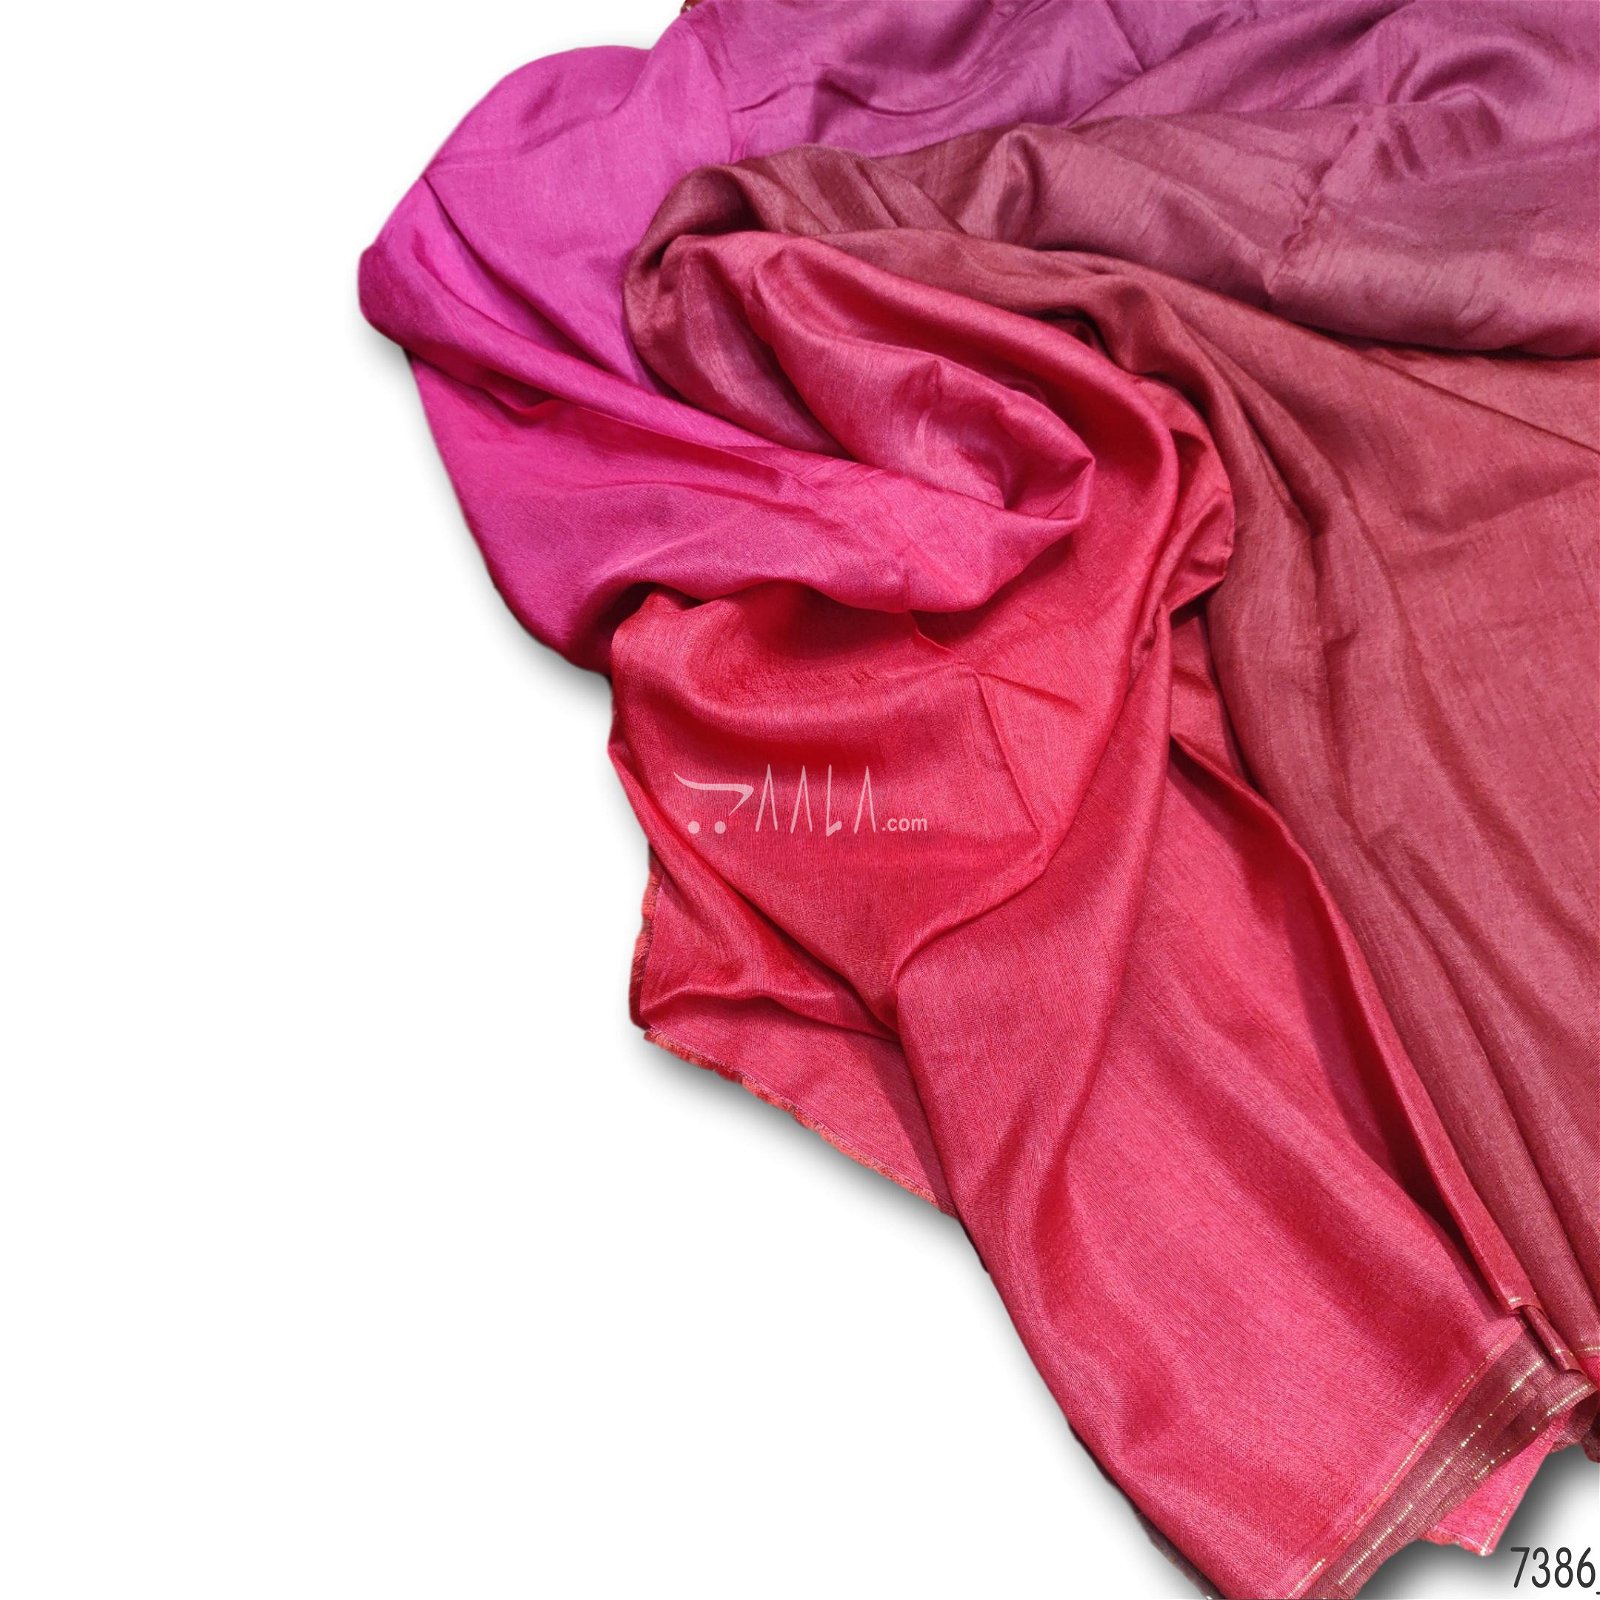 4D-Shaded Raw-Silk Viscose 44-Inches ASSORTED Per-Metre #7386
